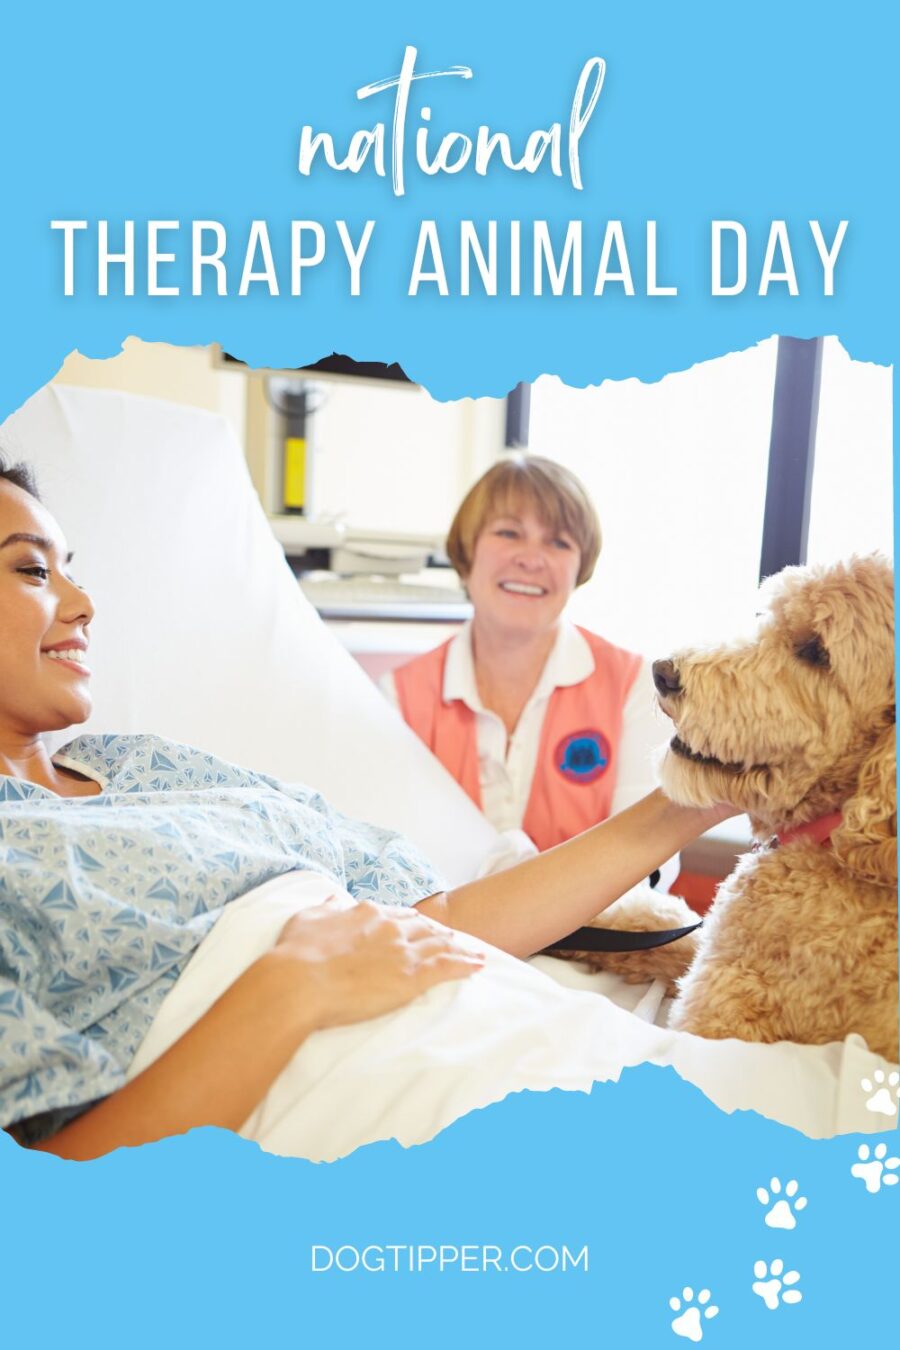 National Therapy Animal Day #dogs #petholidays #therapydogs #therapyanimals